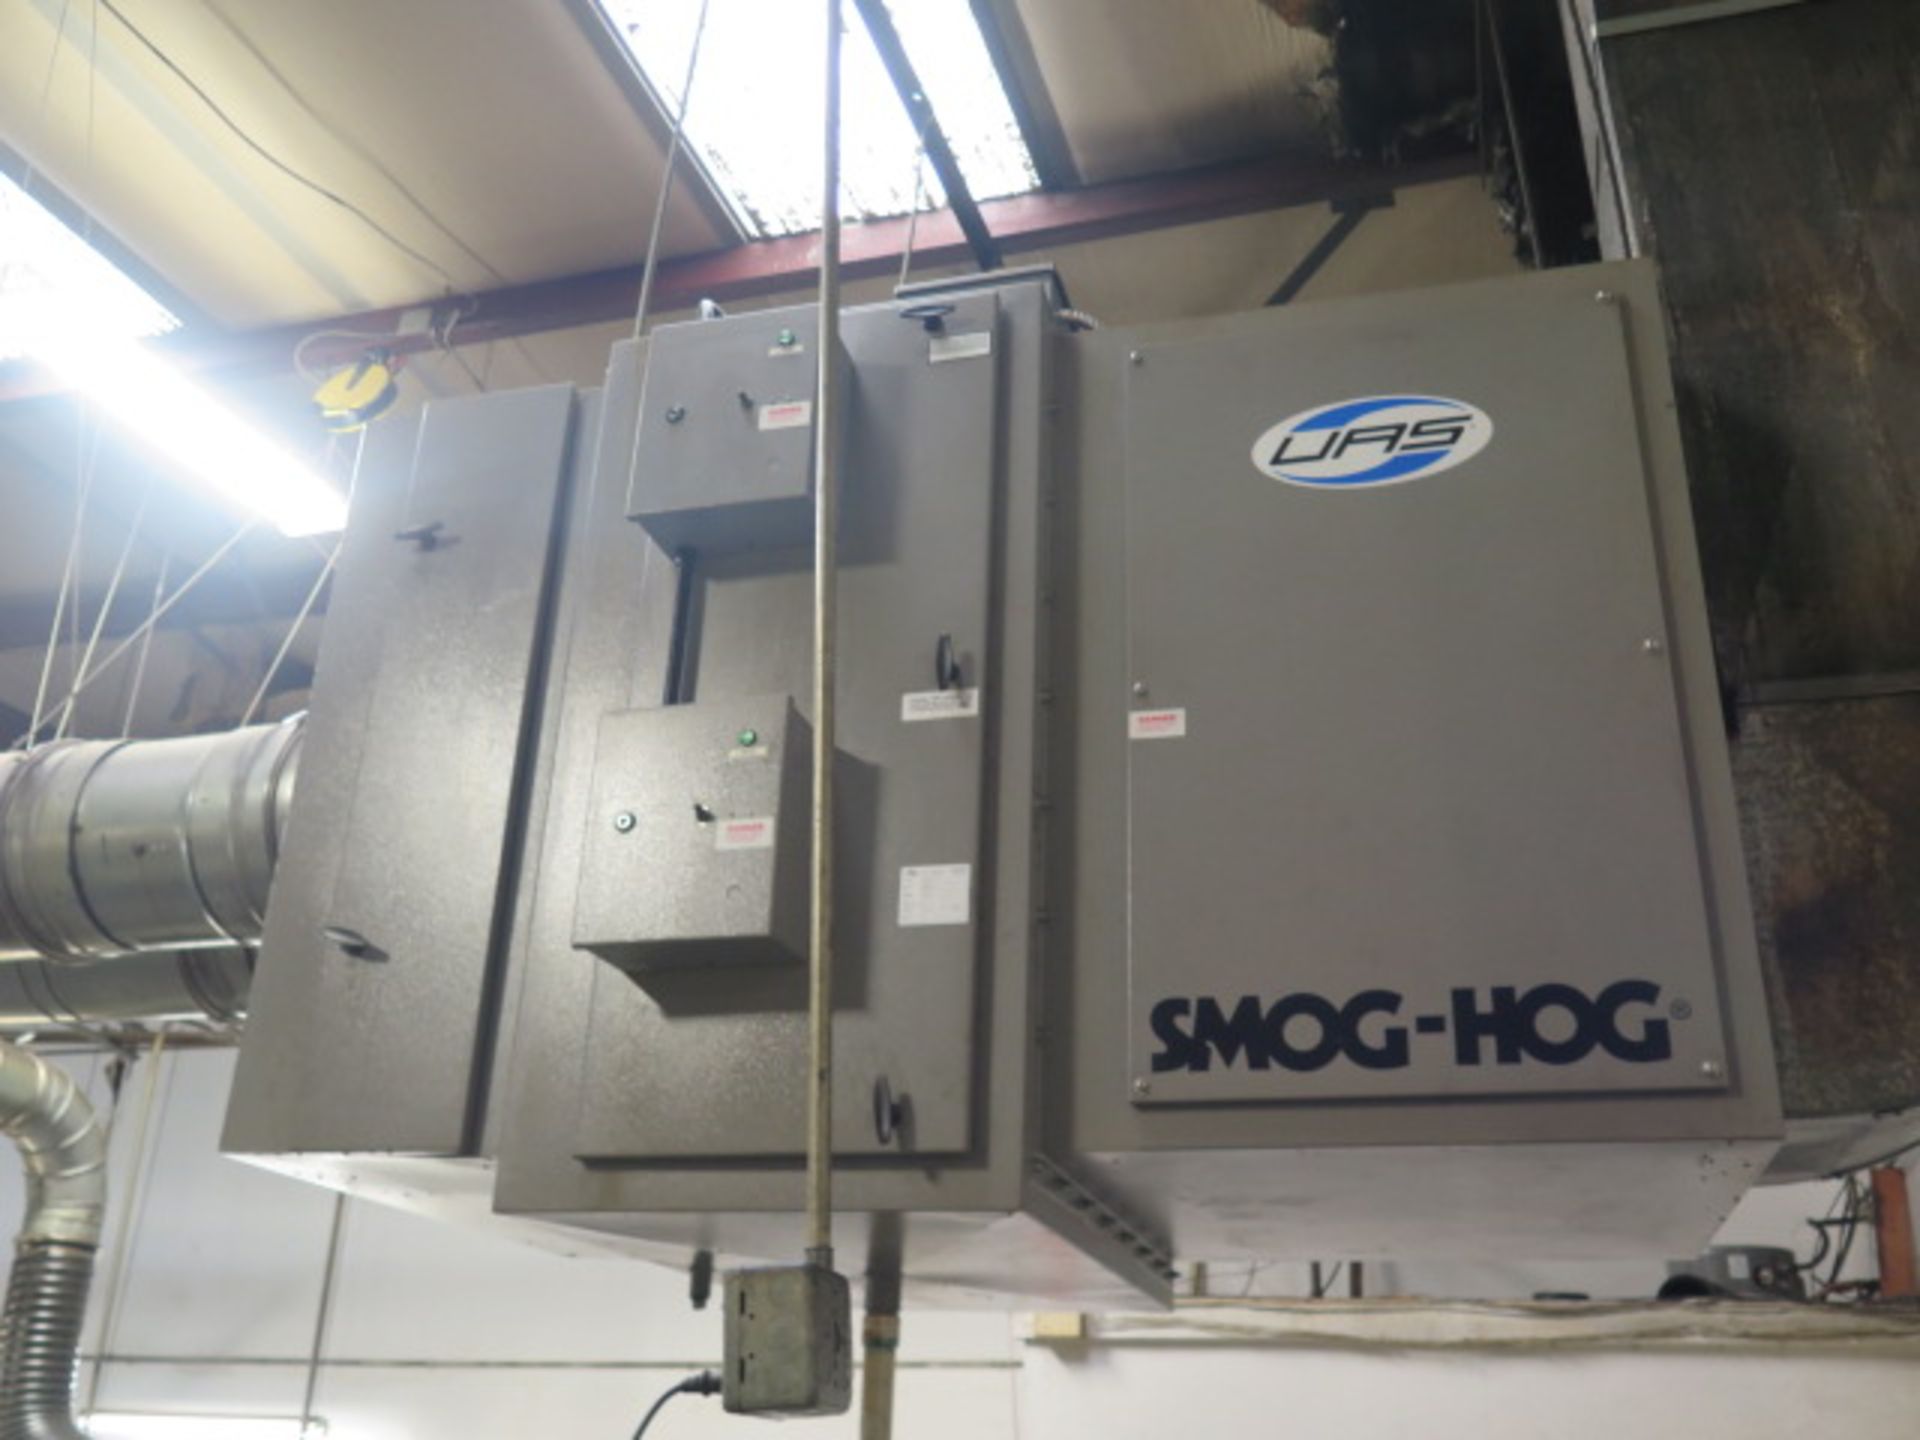 Smog-Hog mdl. SG-45-H Industrial Air Cleaner s/n 60066222 (SOLD AS-IS - NO WARRANTY) - Image 3 of 6